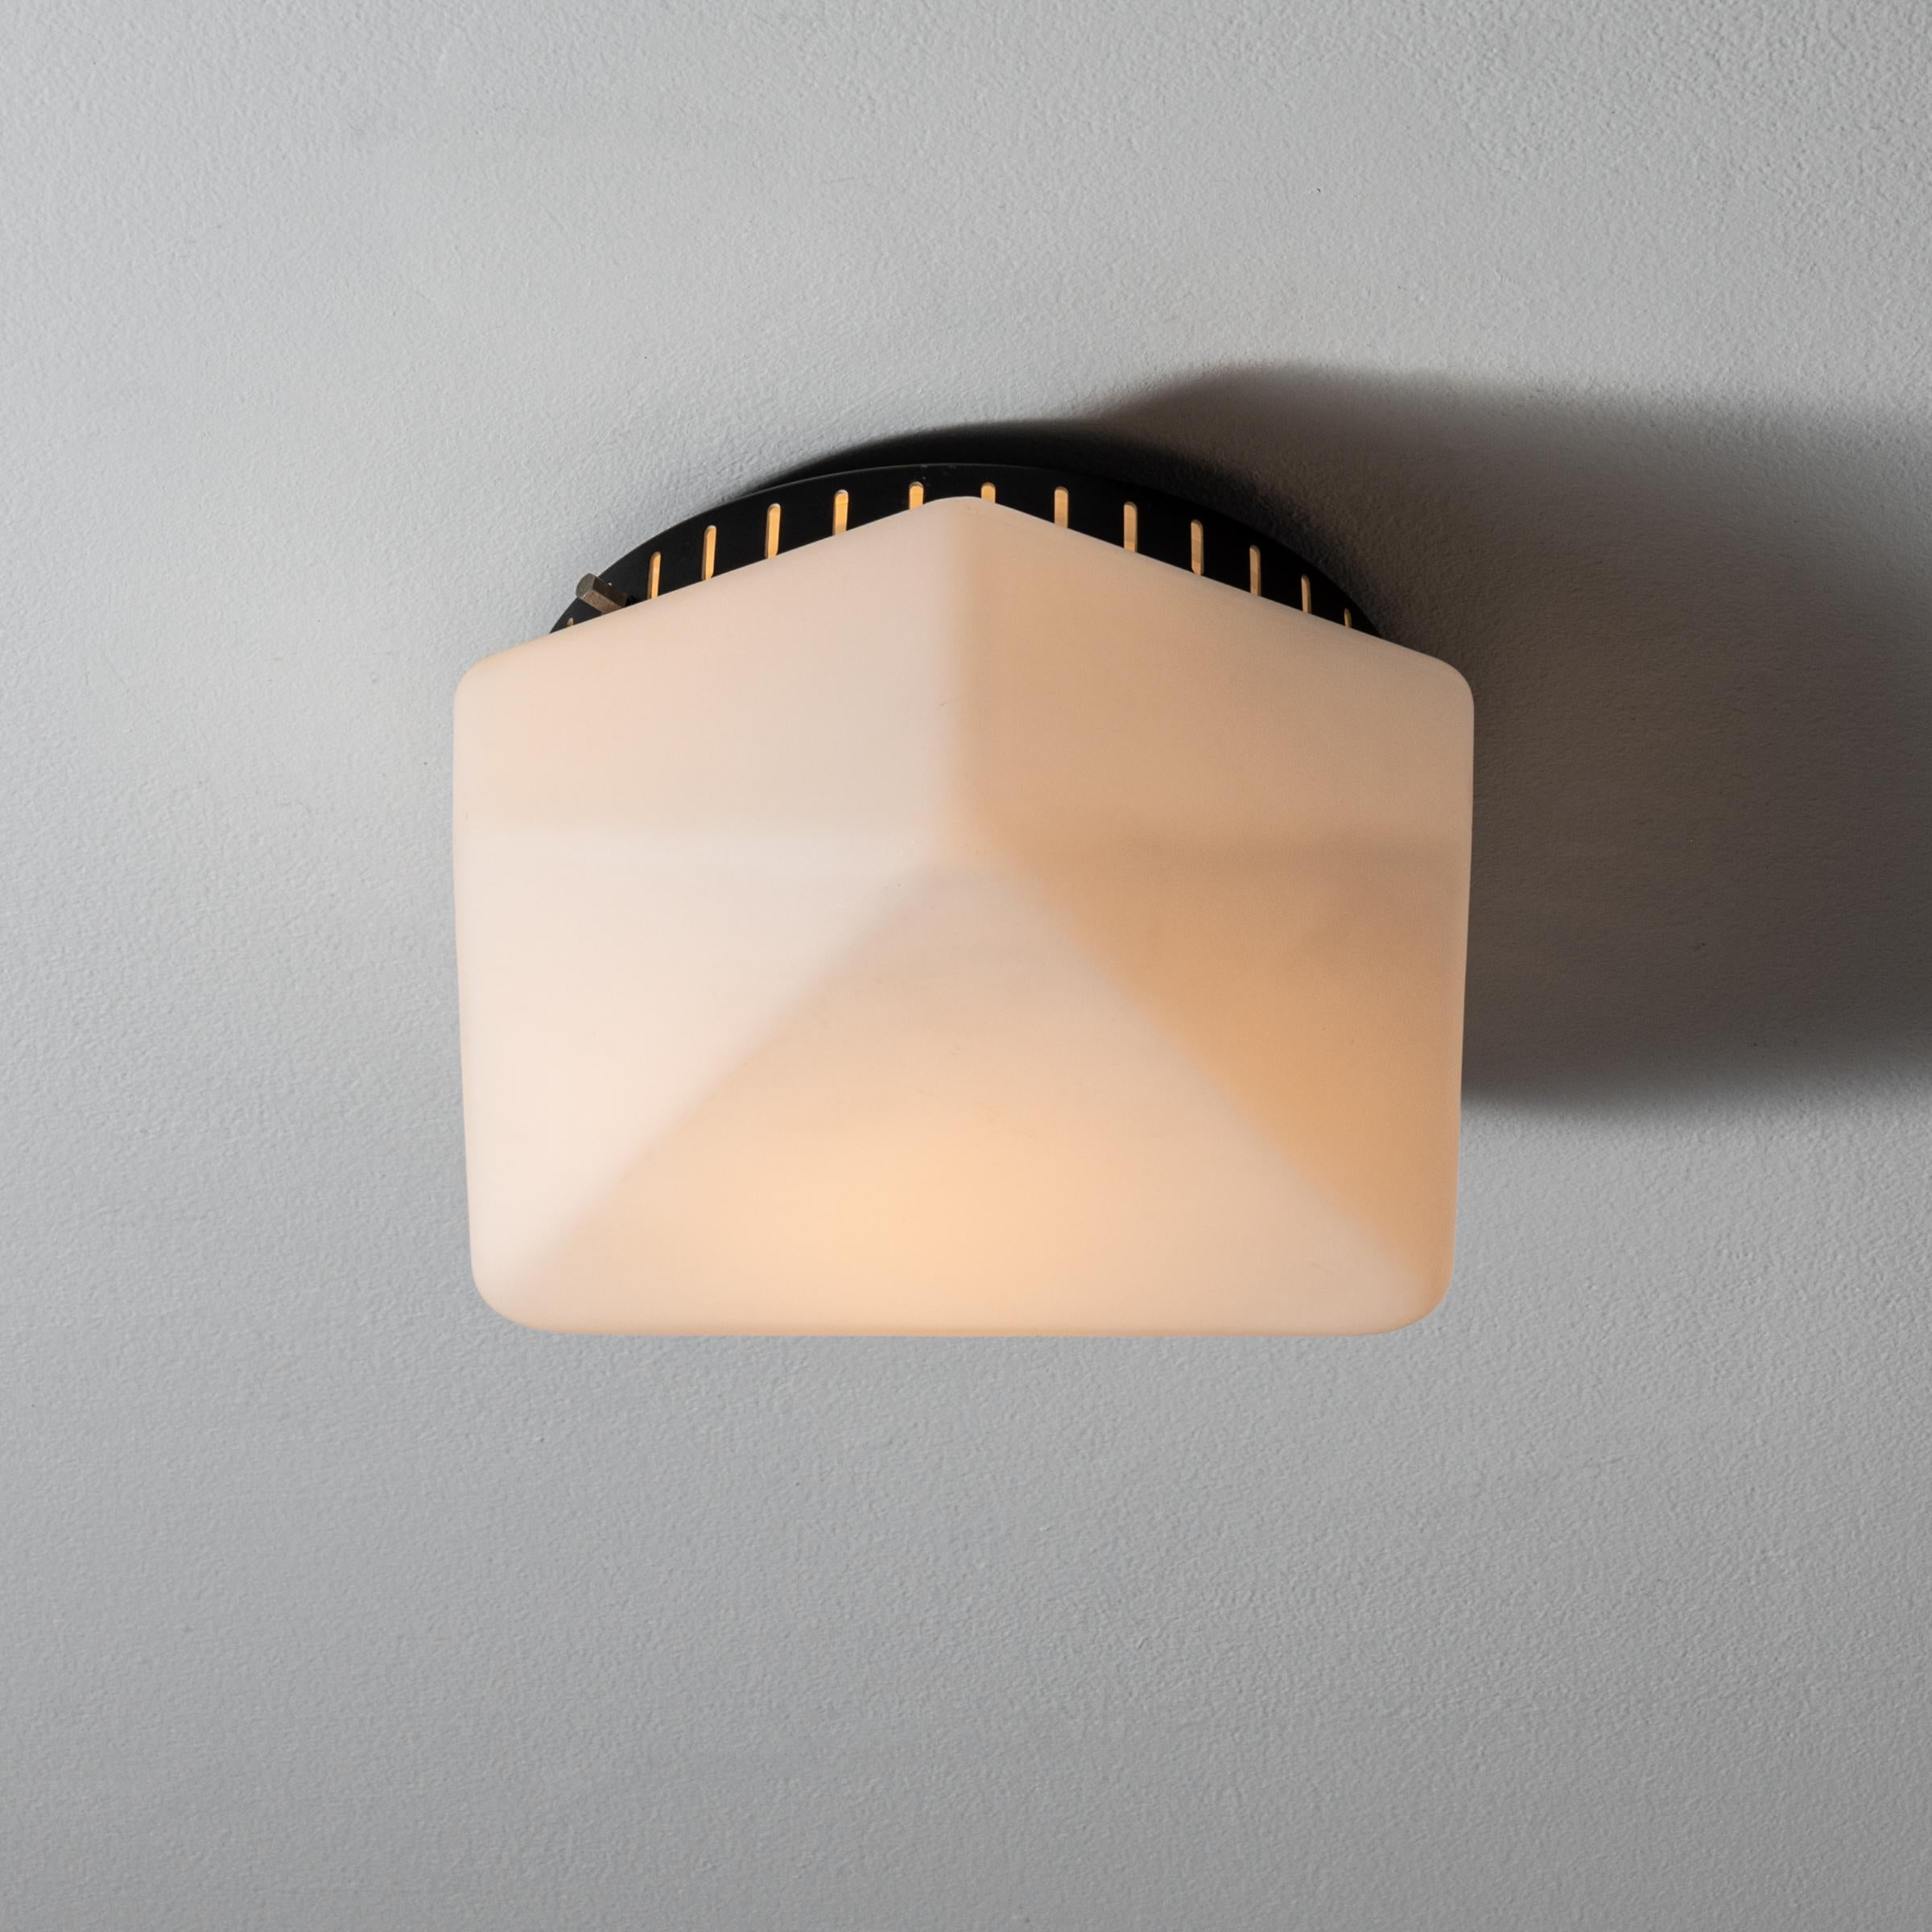 Flush mount ceiling light by Stilnovo. Manufactured in Italy, circa. 1960. Perforated sheet metal, brushed satin glass diffuser. Rewired for U.S. standards. We recommend one E27 100w maximum bulb. Bulb not included.

 